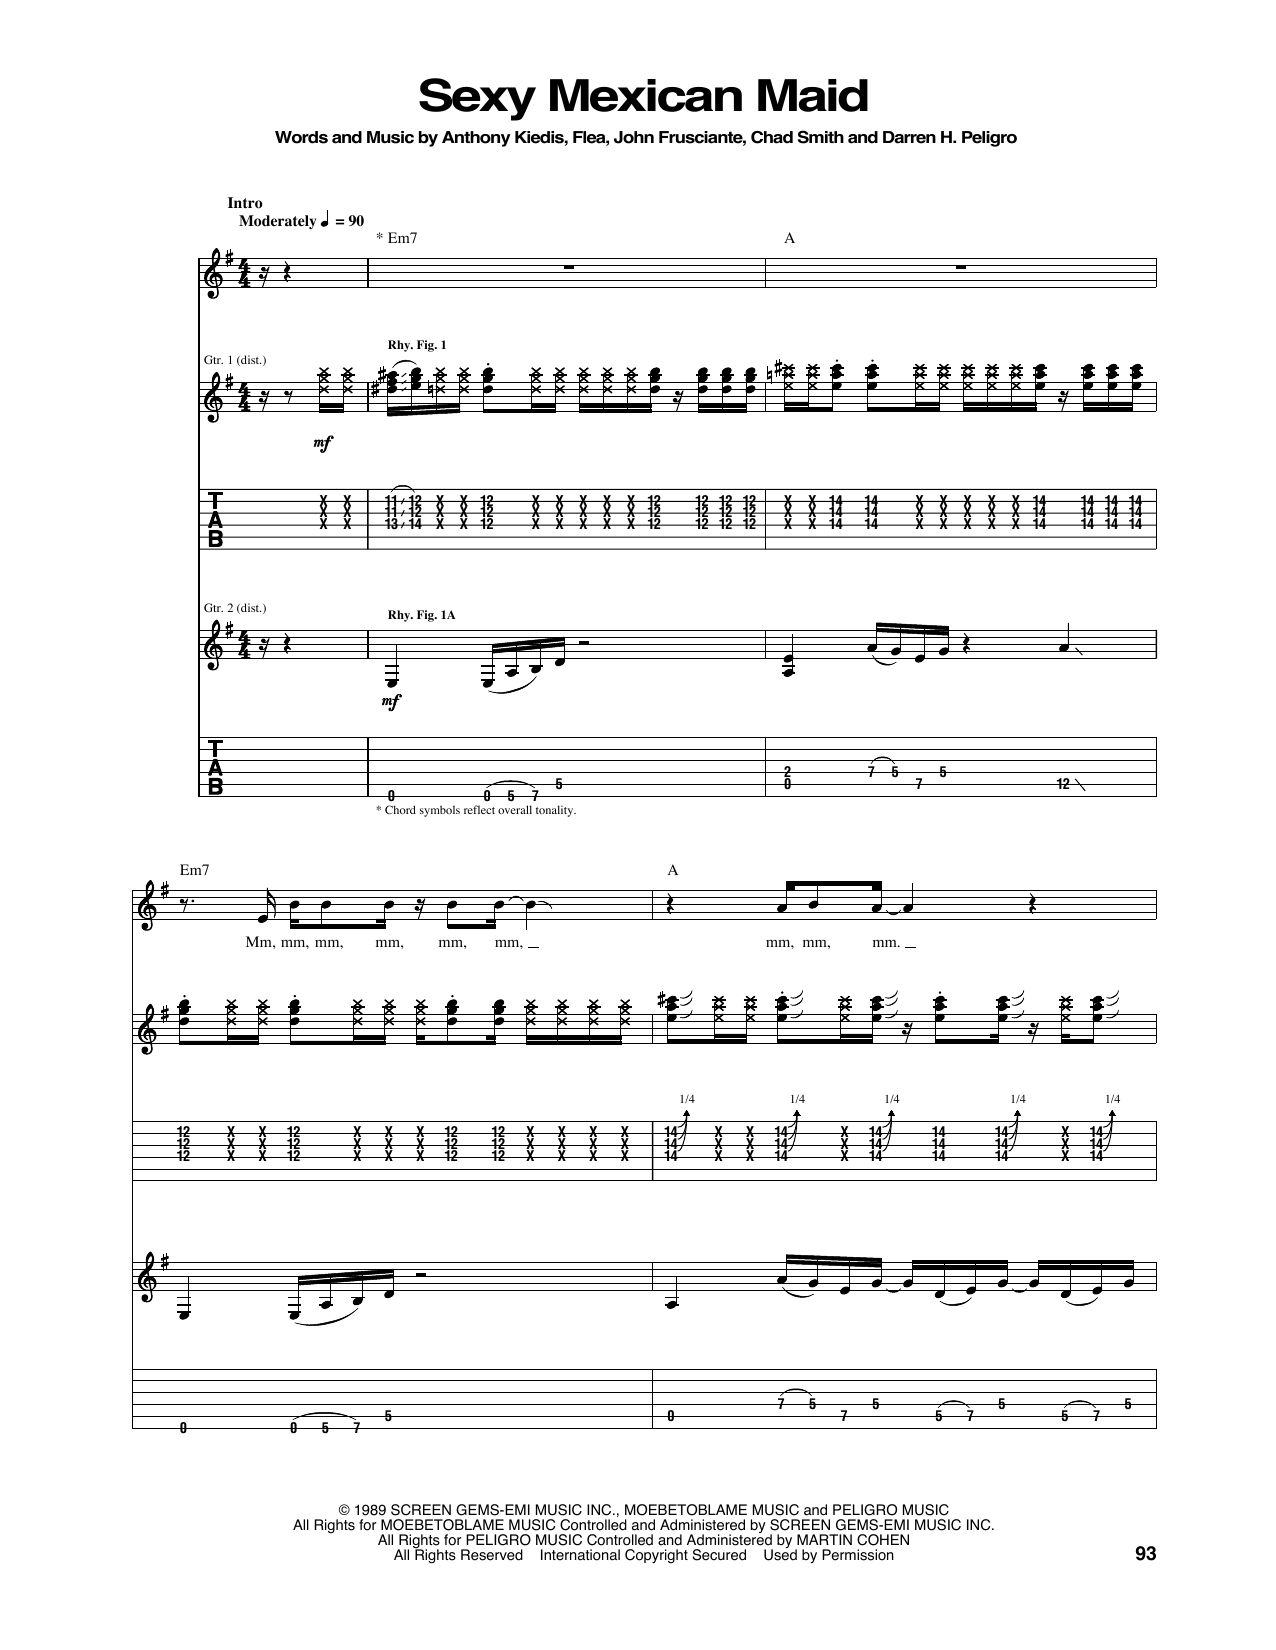 Download Red Hot Chili Peppers Sexy Mexican Maid Sheet Music